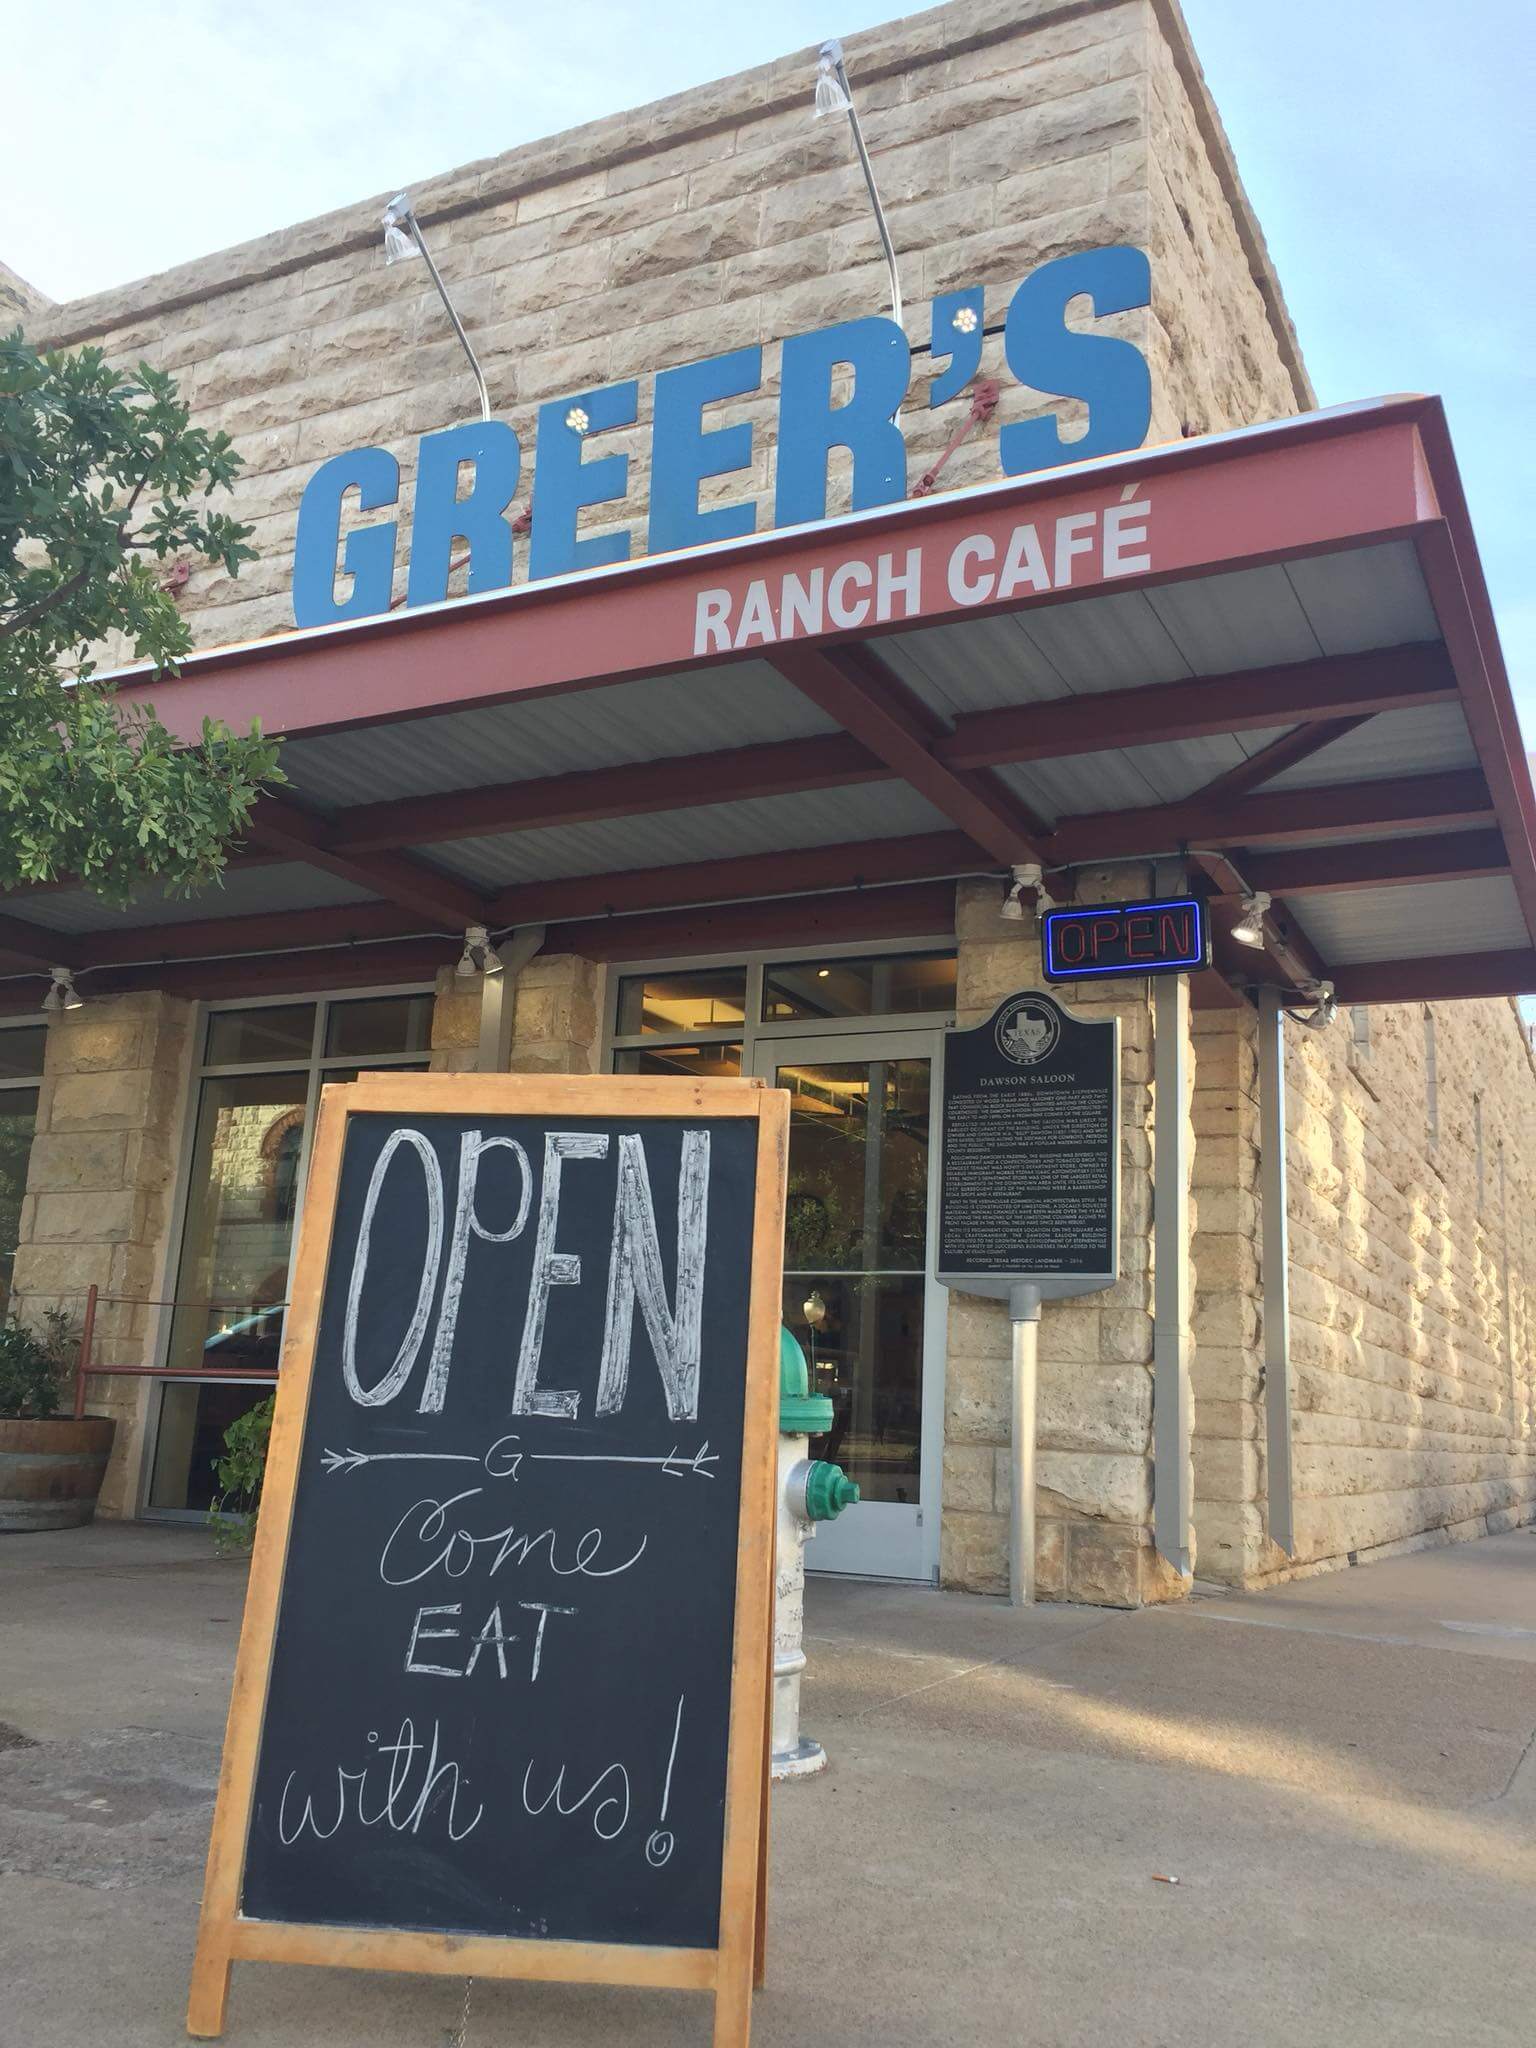 The exterior of Greer Ranch Café in Stephenville, Texas. June 2021